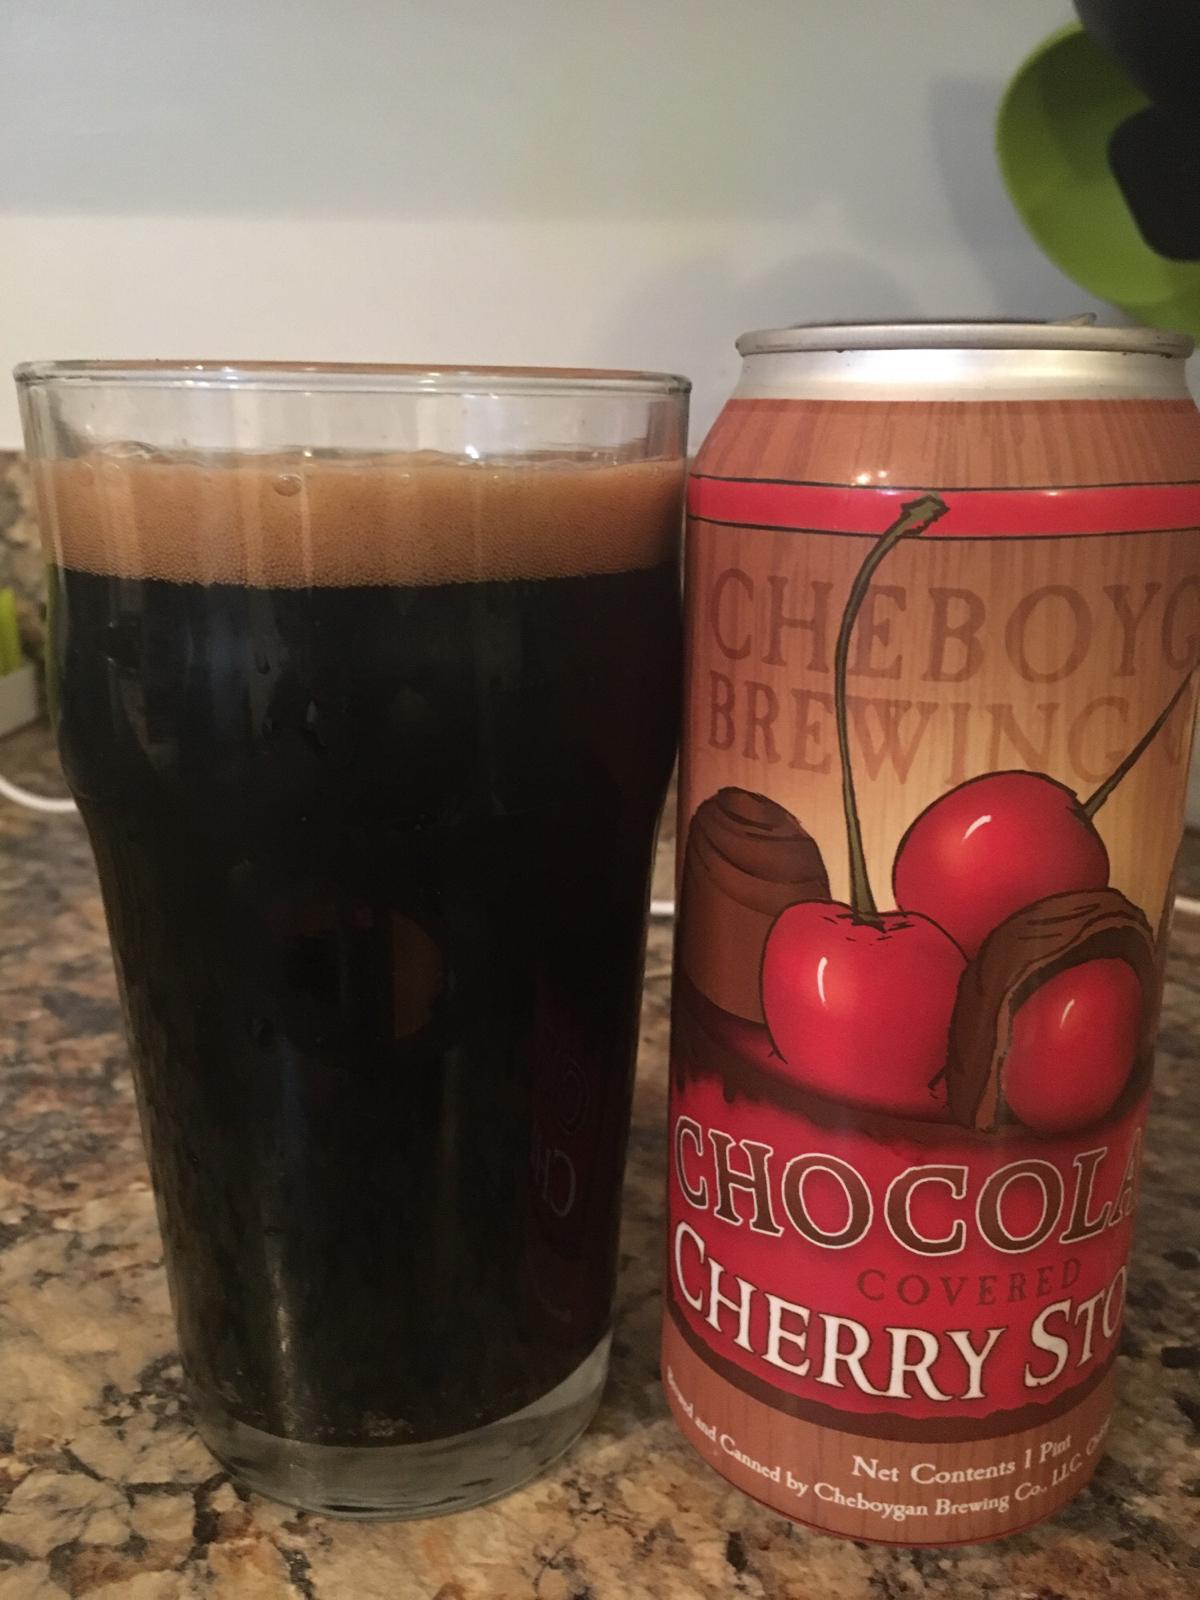 Chocolate Covered Cherry Stout